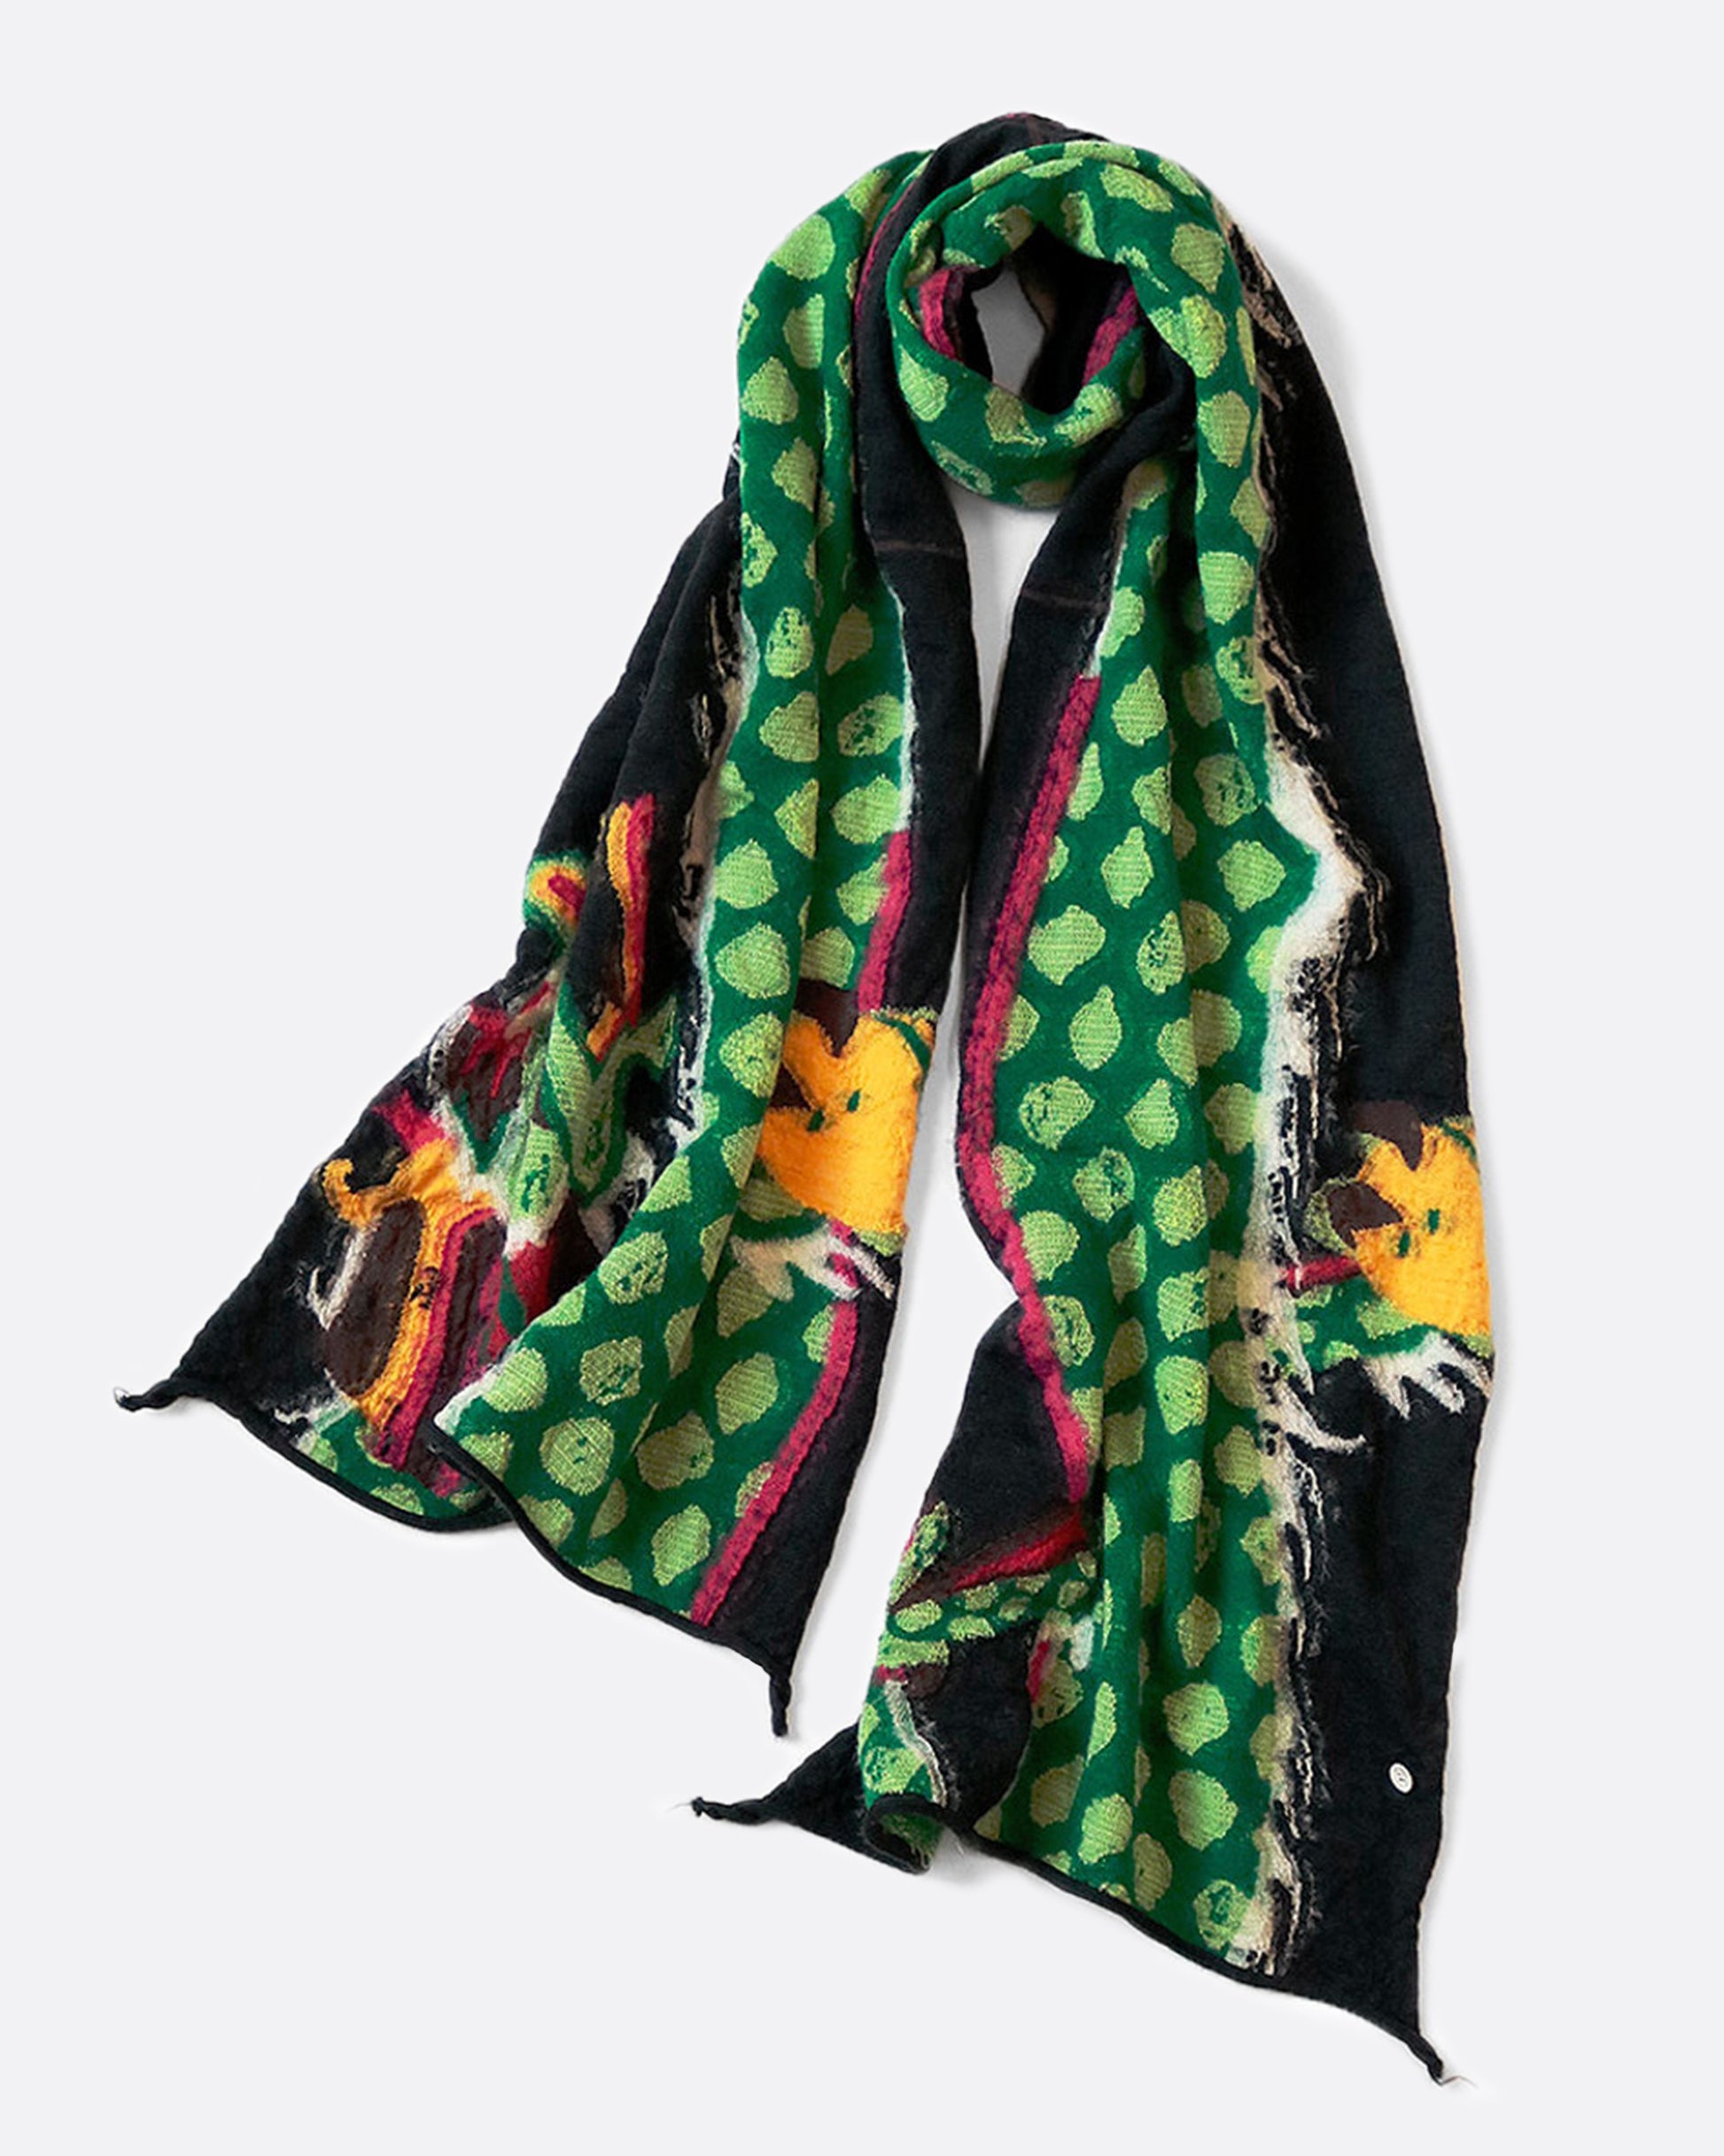 A wool scarf featuring a traditional Chinese dragon dance designed using shades of green and black.